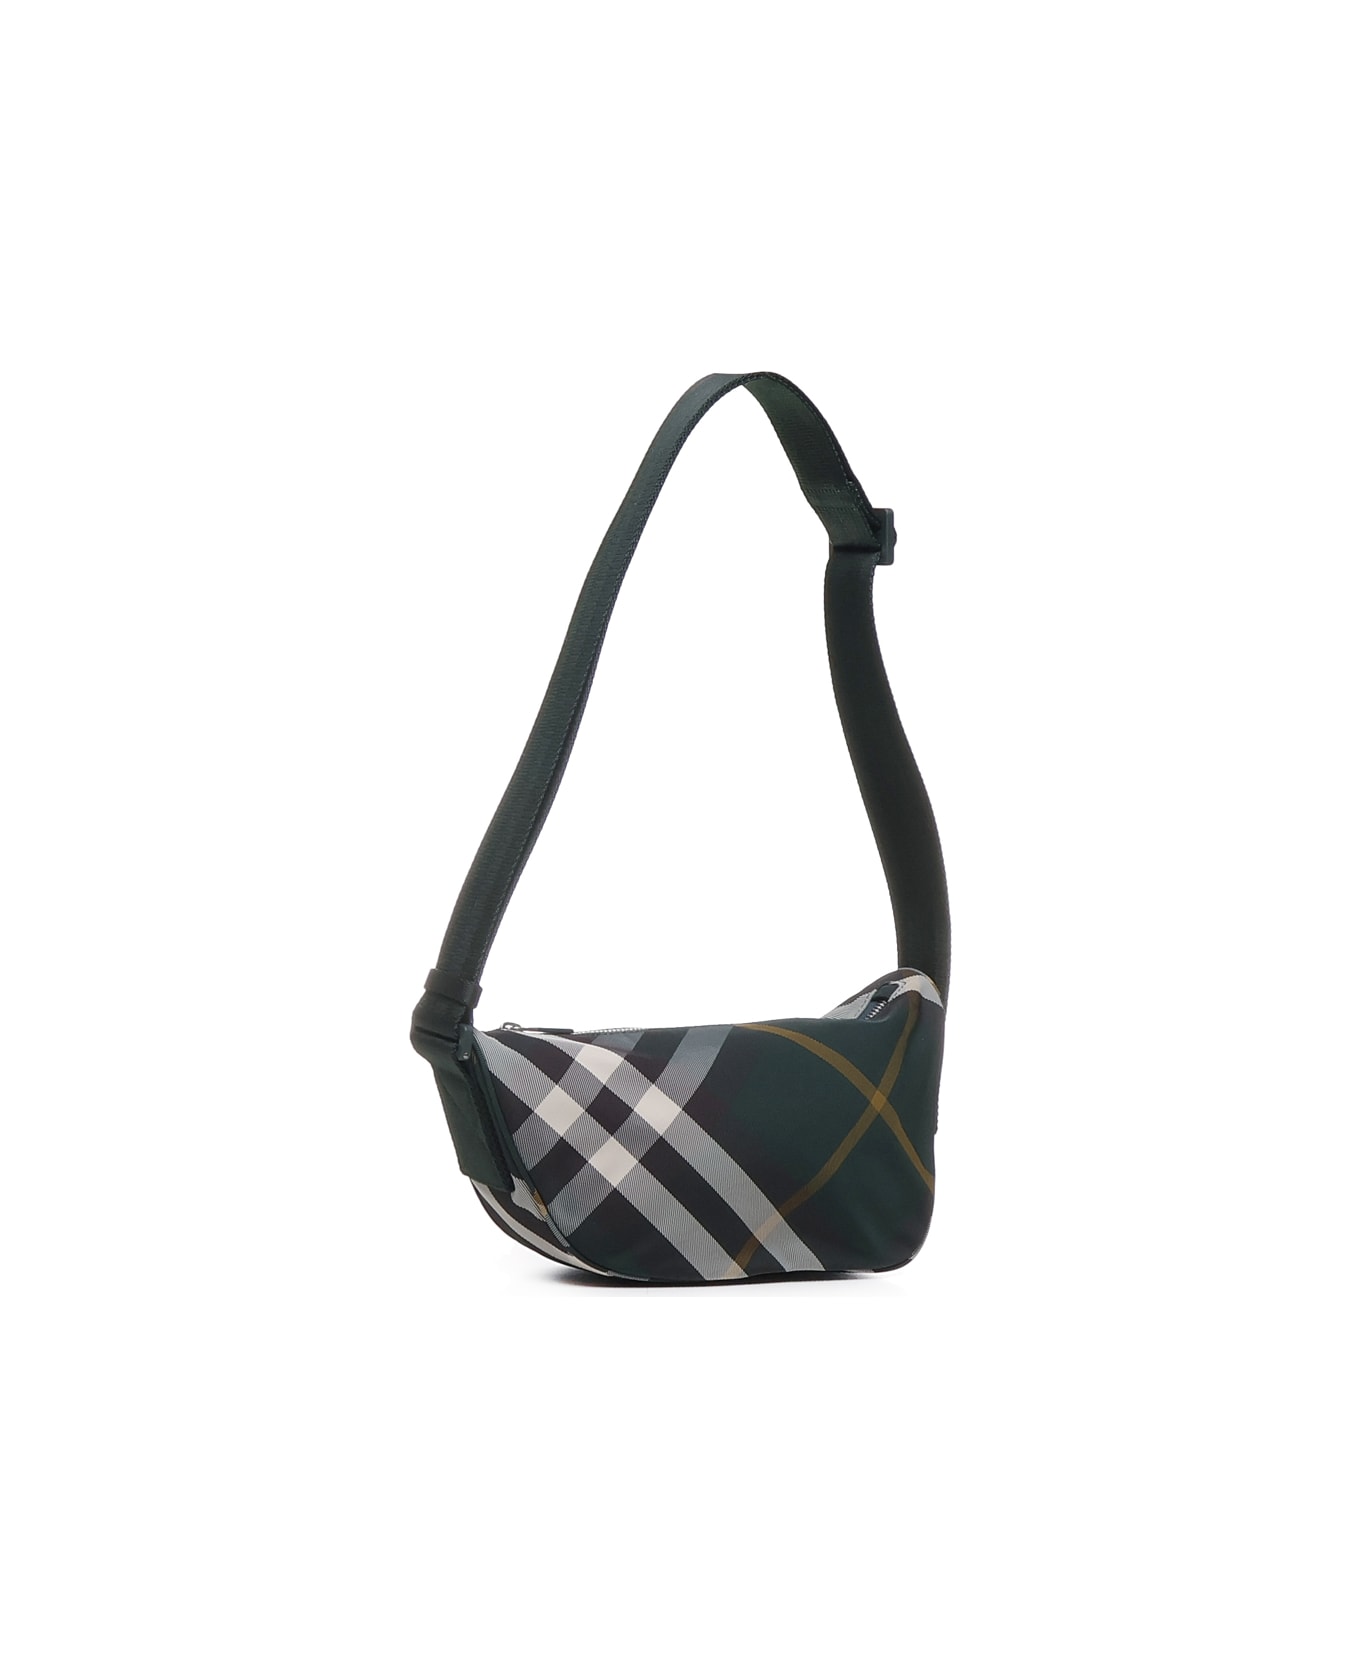 Burberry Check Pouch Bag - Ivy ショルダーバッグ